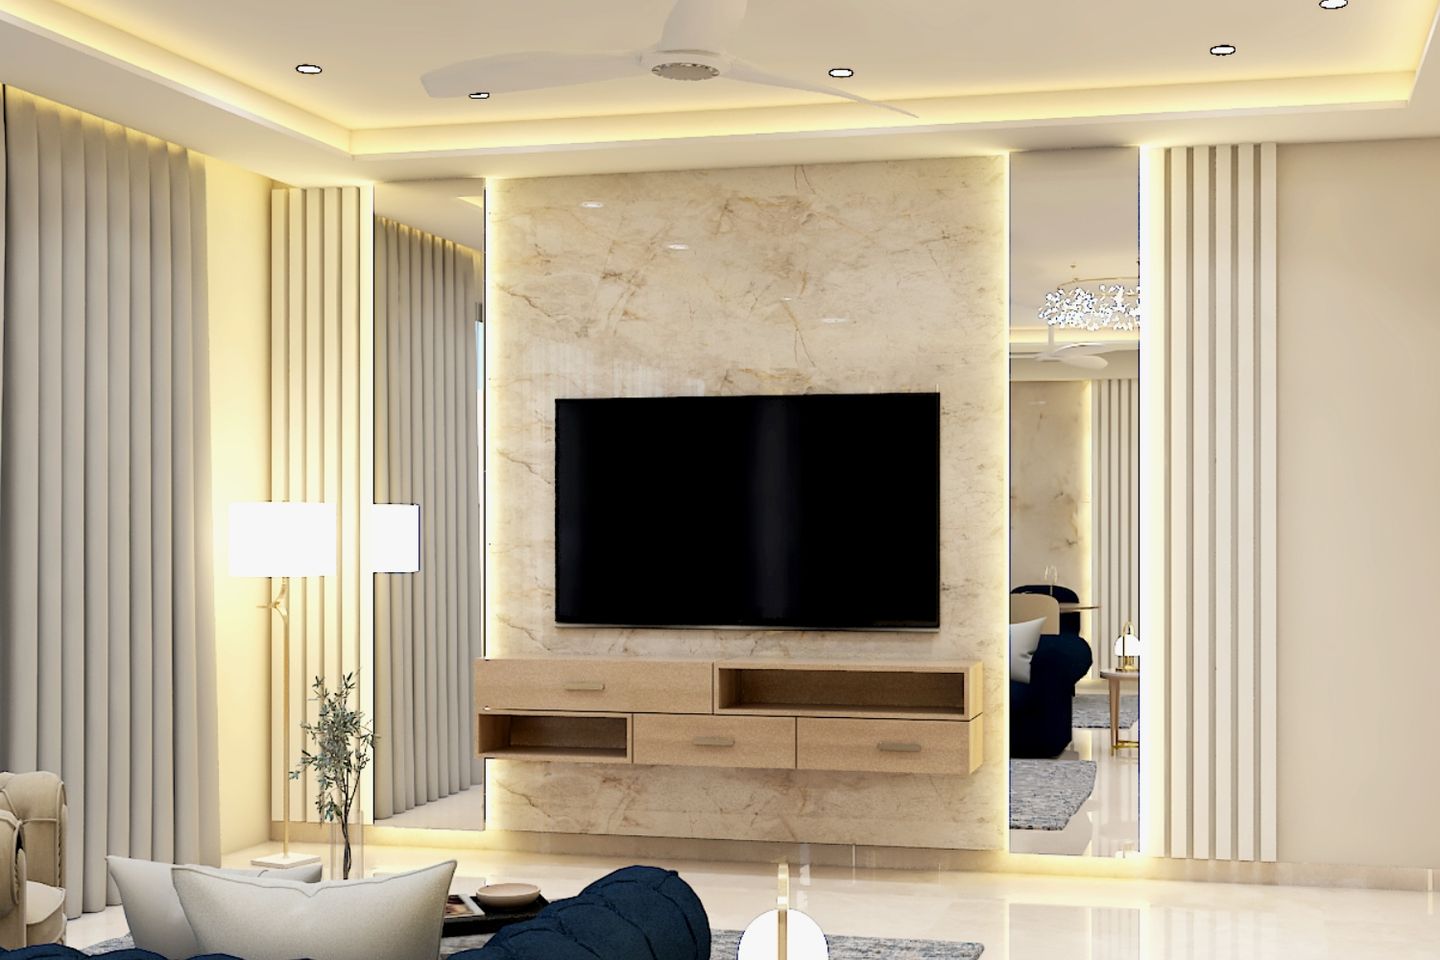 Wall-Mounted TV Unit Design With Cream Marble Panel And Side Mirrors - Livspace